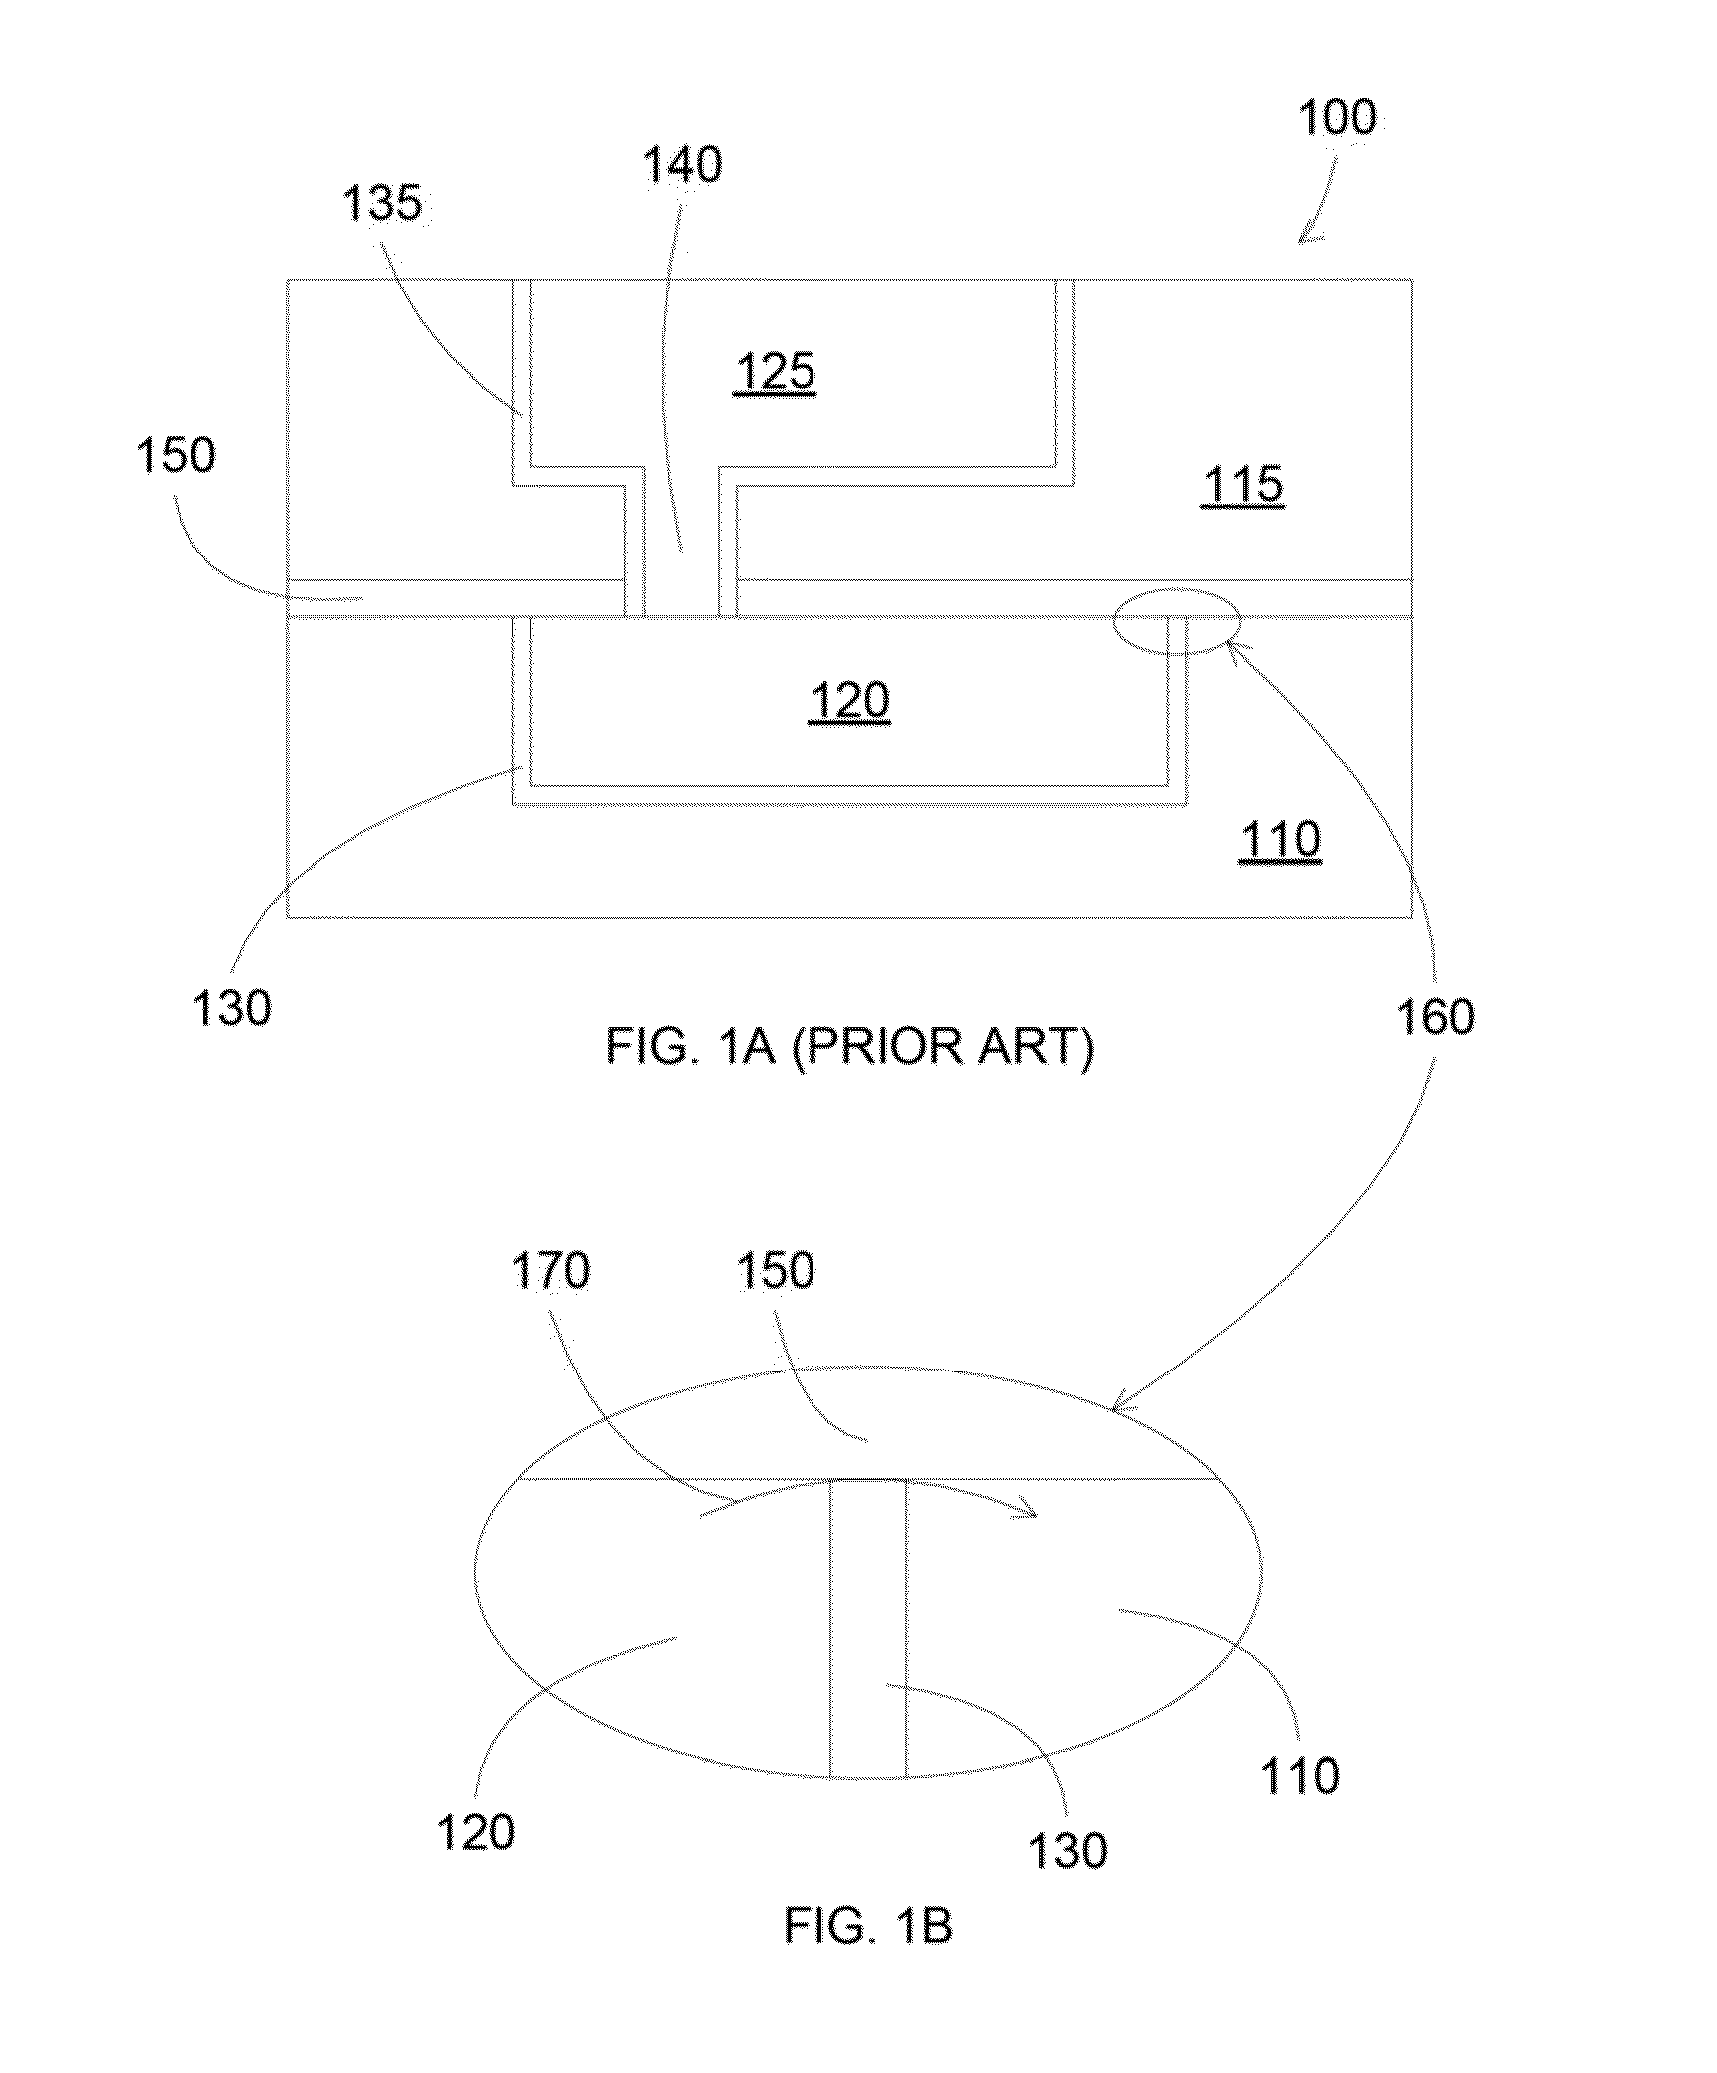 Method to etch Cu/Ta/TaN selectively using dilute aqueous HF/HCI solution